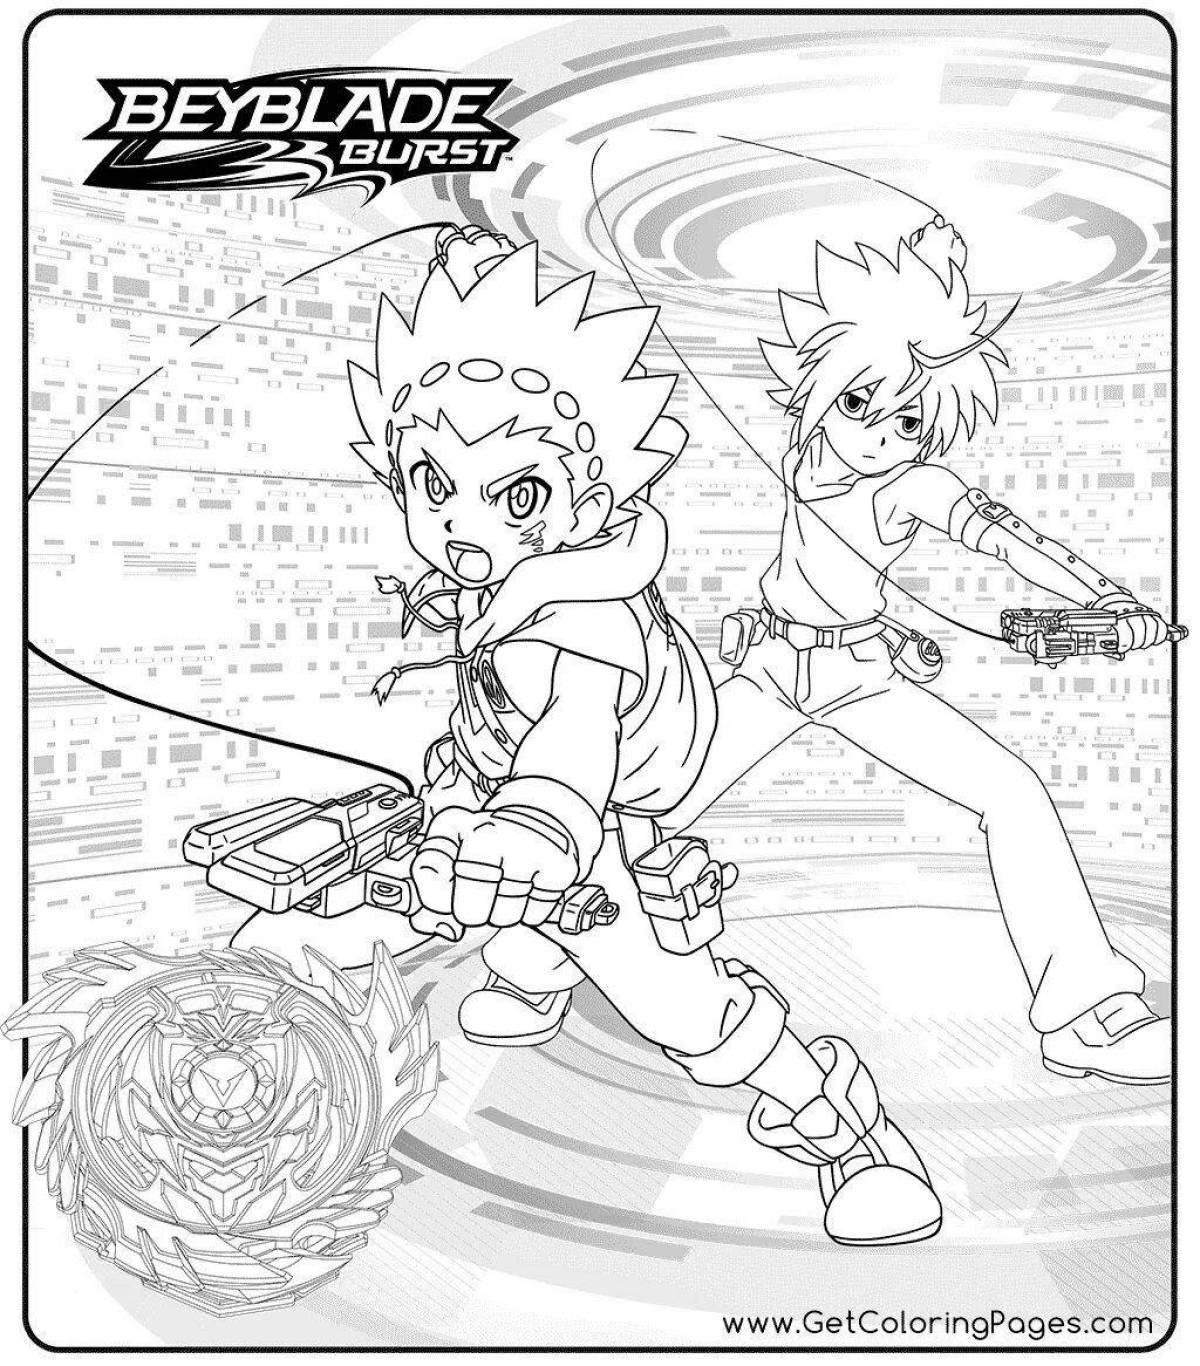 Beyblade burst coloring page